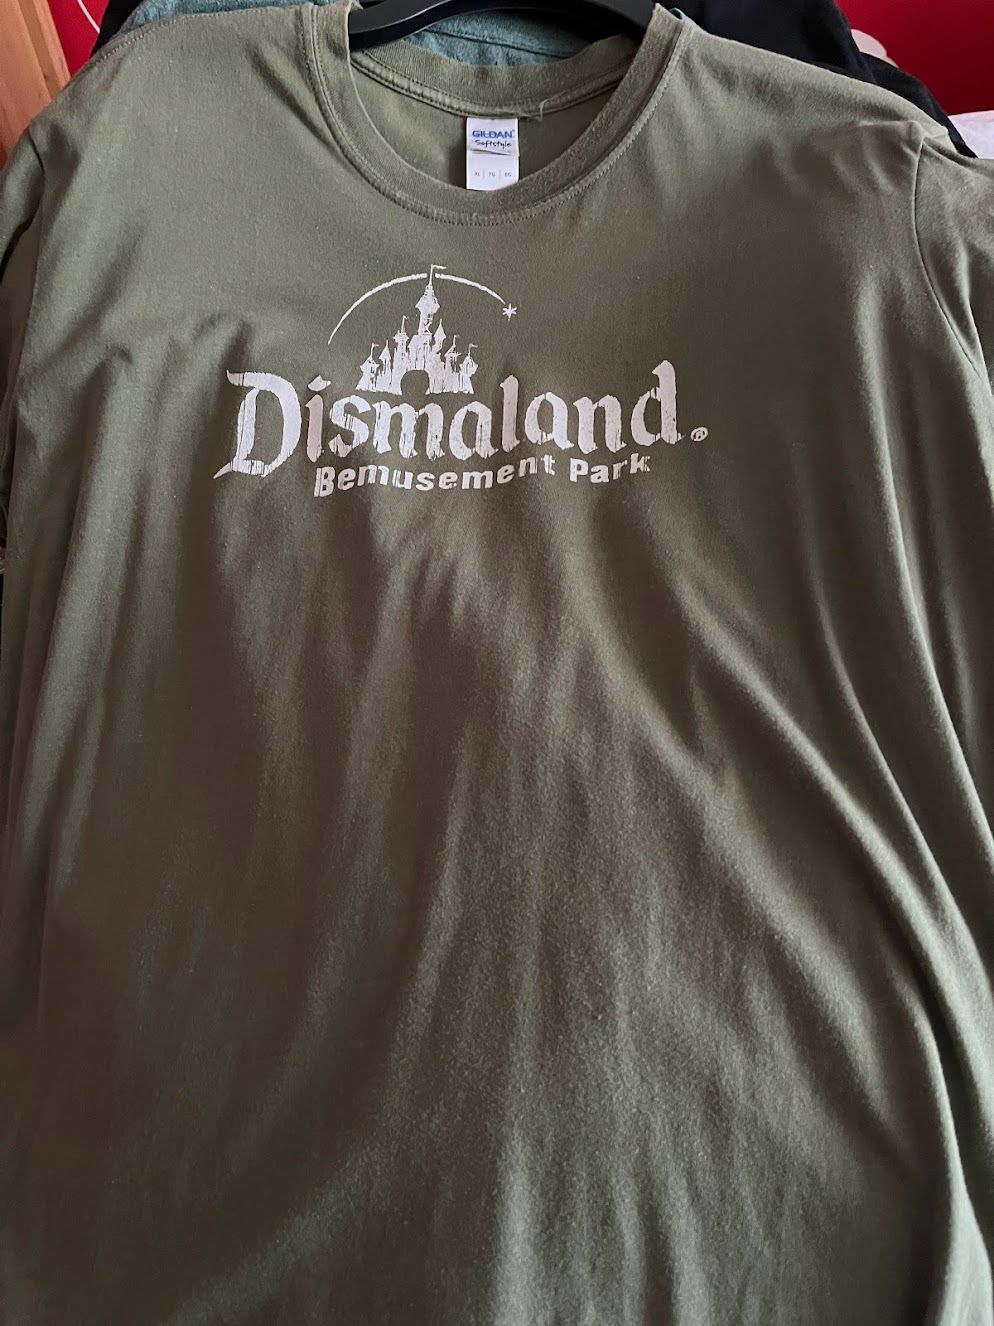 Dismaland by Banksy t-shirt in drab green